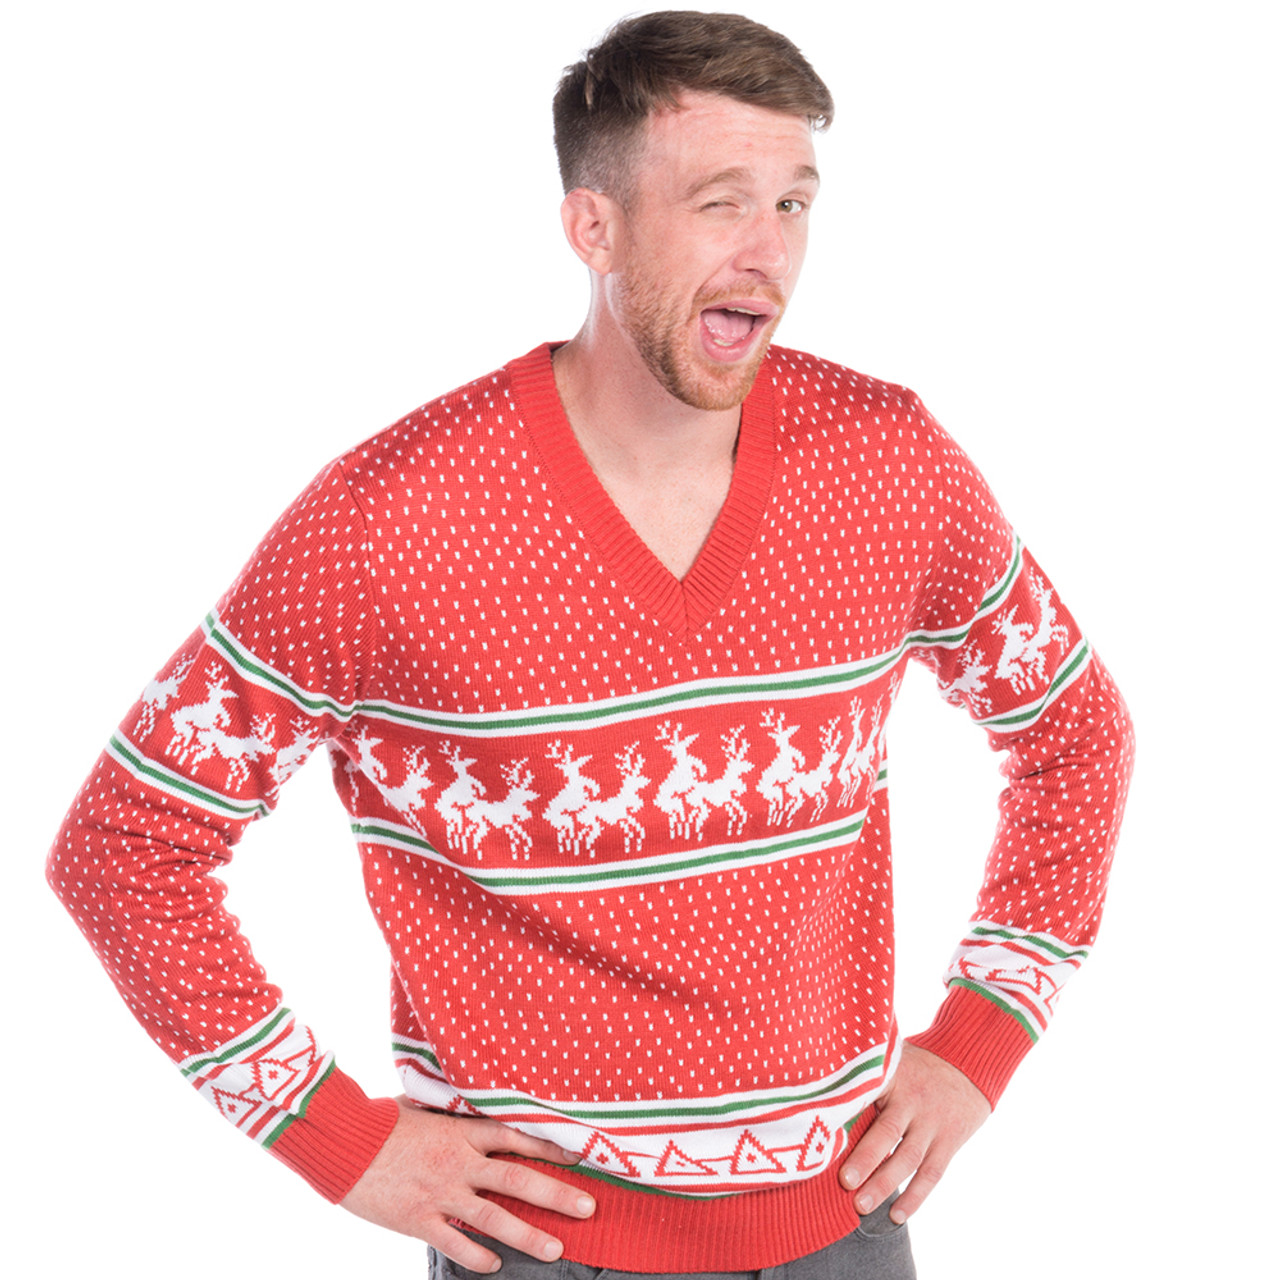 Men's Reindeer Conga Line Ugly Sweater by Tipsy Elves - XL Only